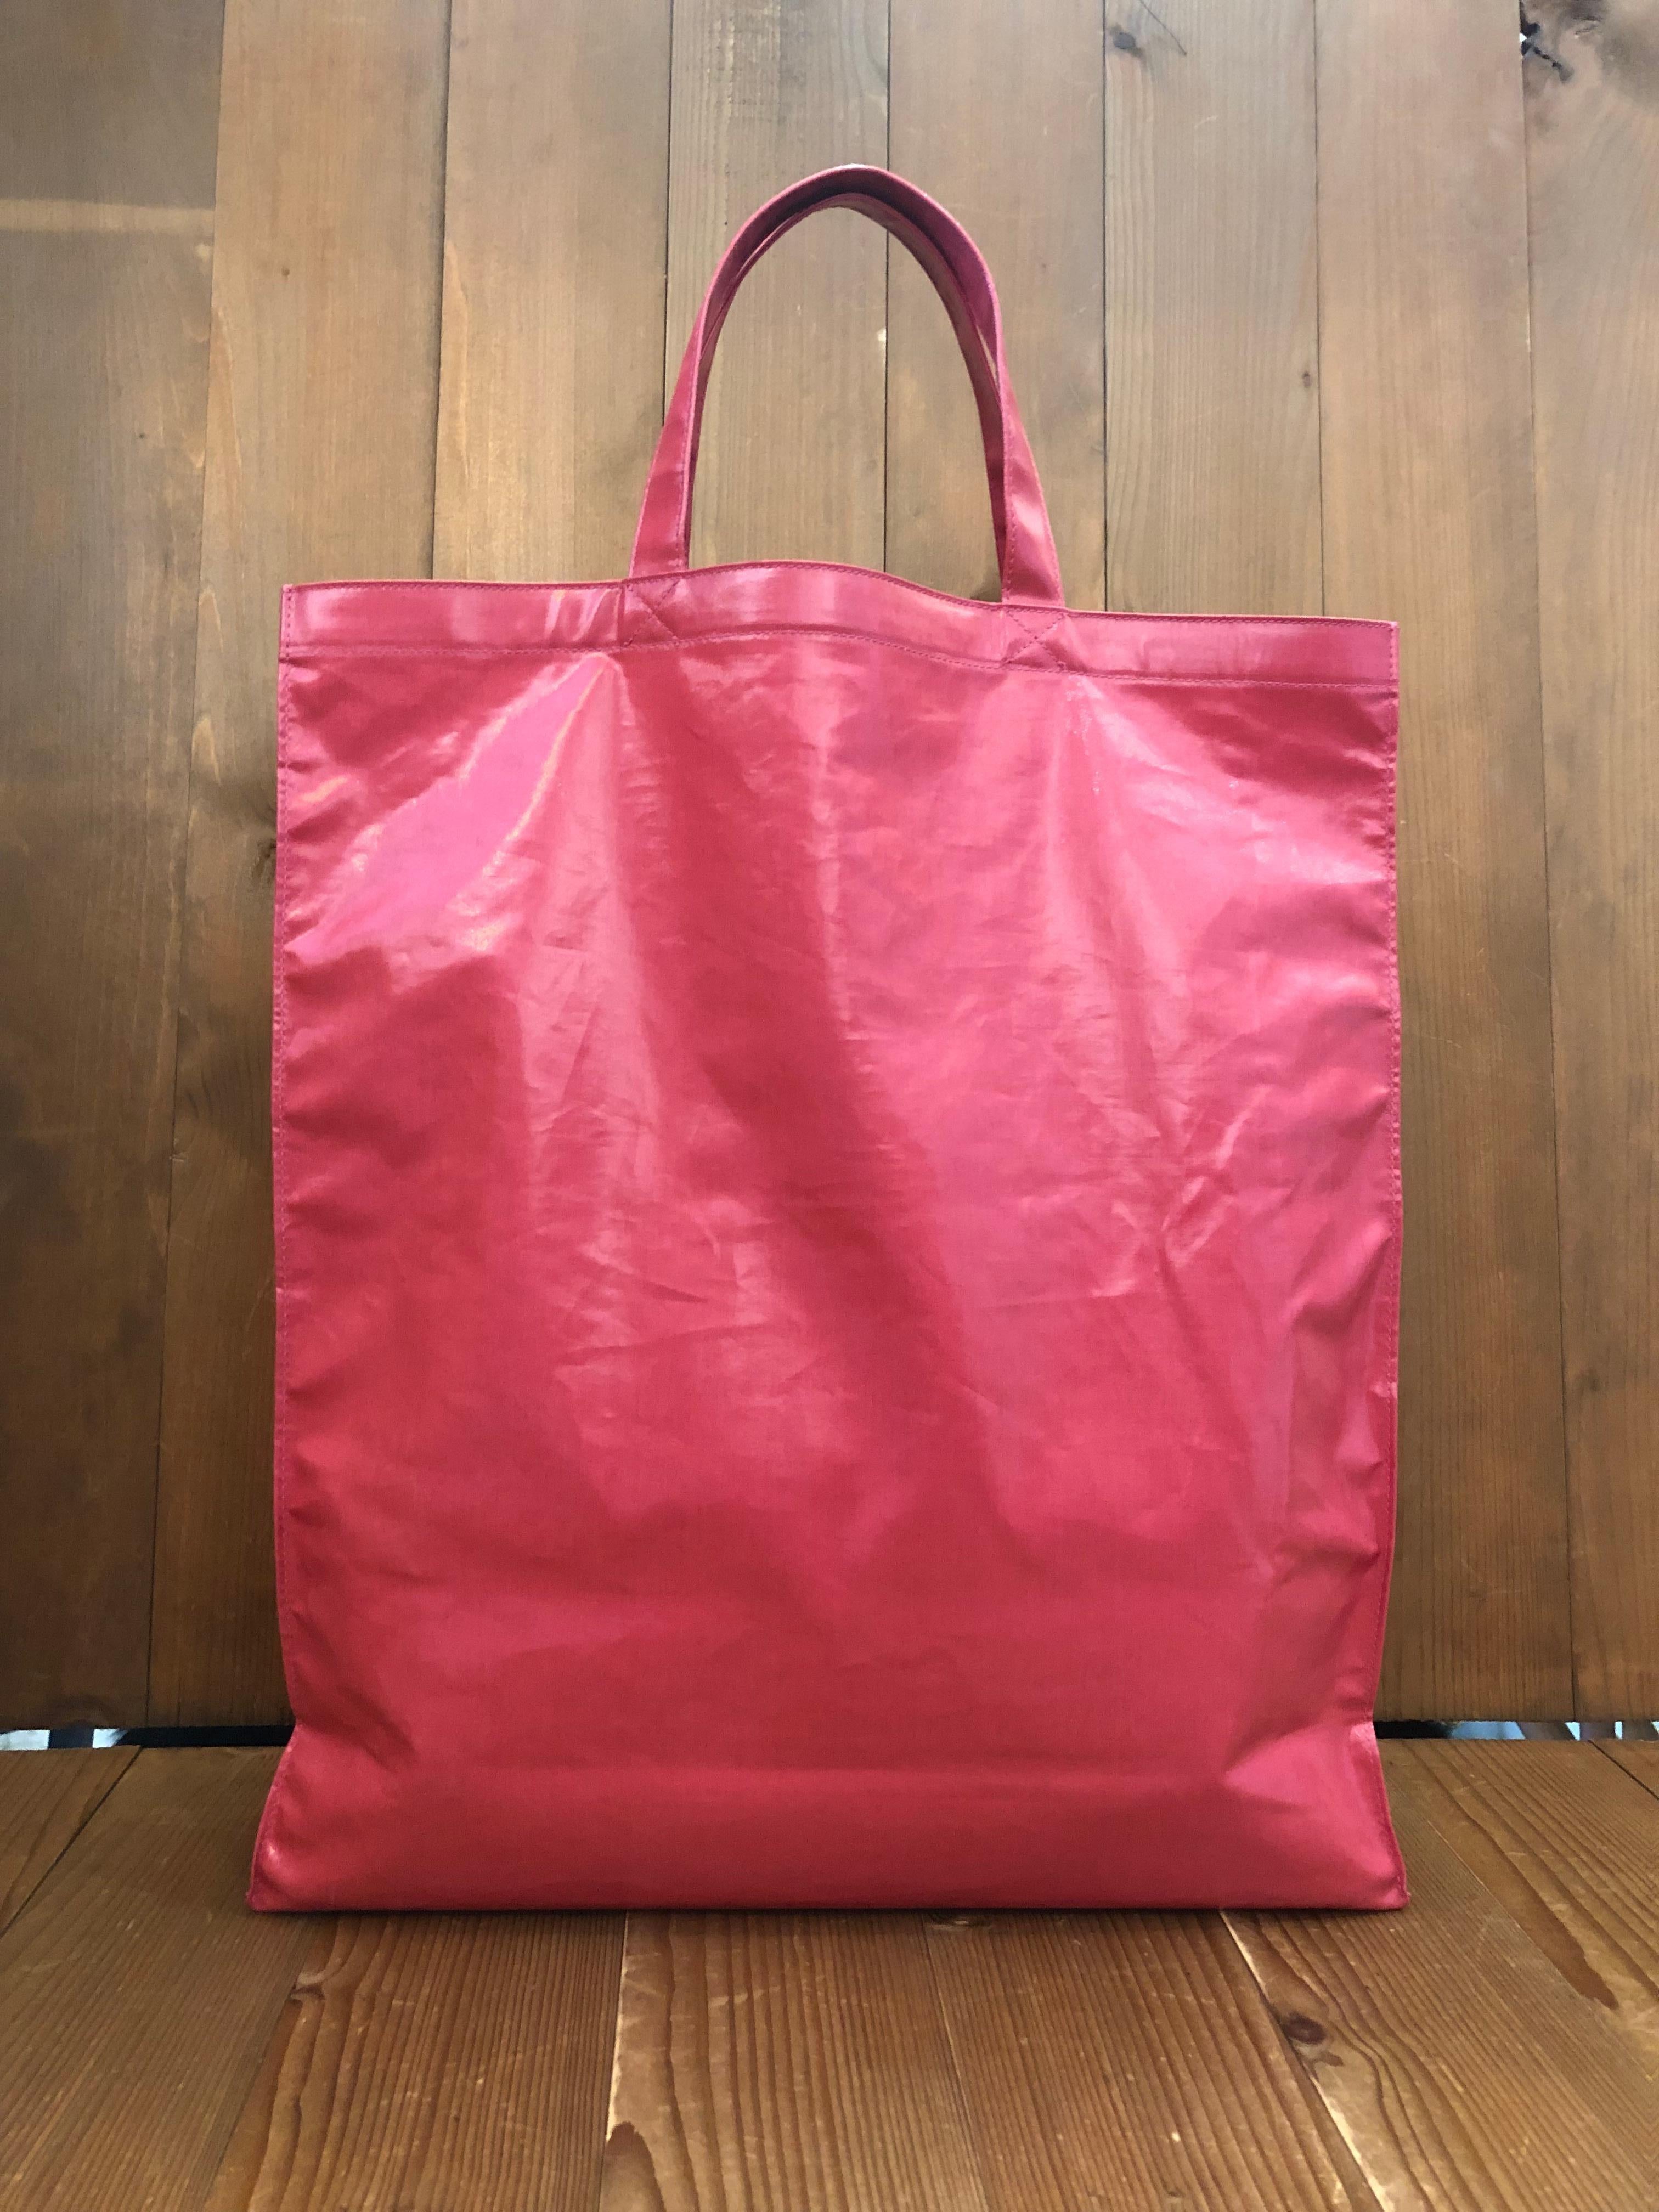 This GUCCI shopper tote is crafted of coated canvas in pink. This shopper tote opens to a spacious un-lined interior which makes in very lightweight. It is the perfect tote for carrying your documents for work or simply for carrying your groceries.